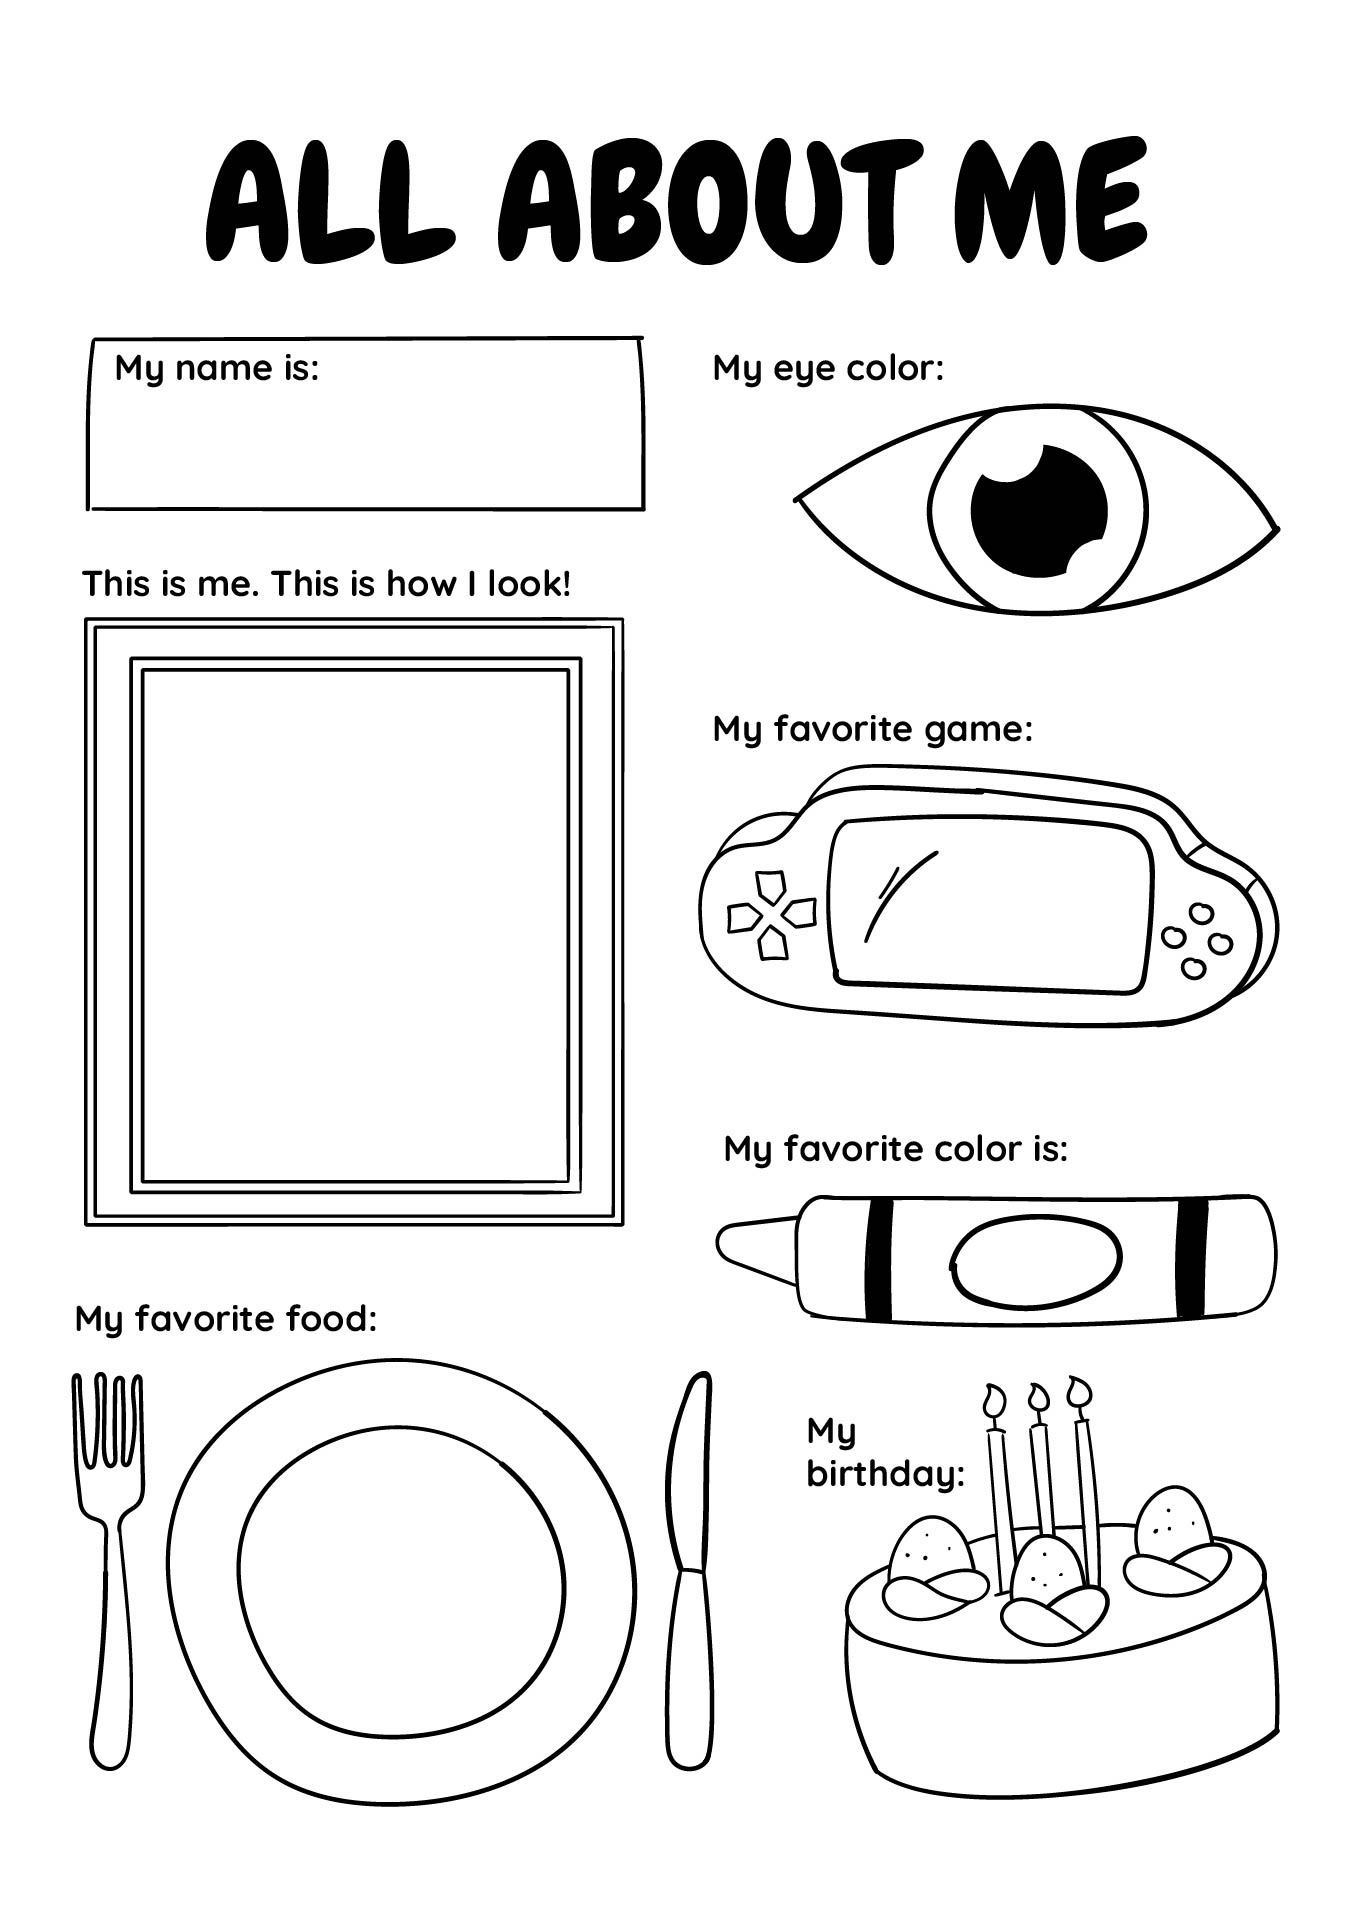 All About Me Activity Worksheets